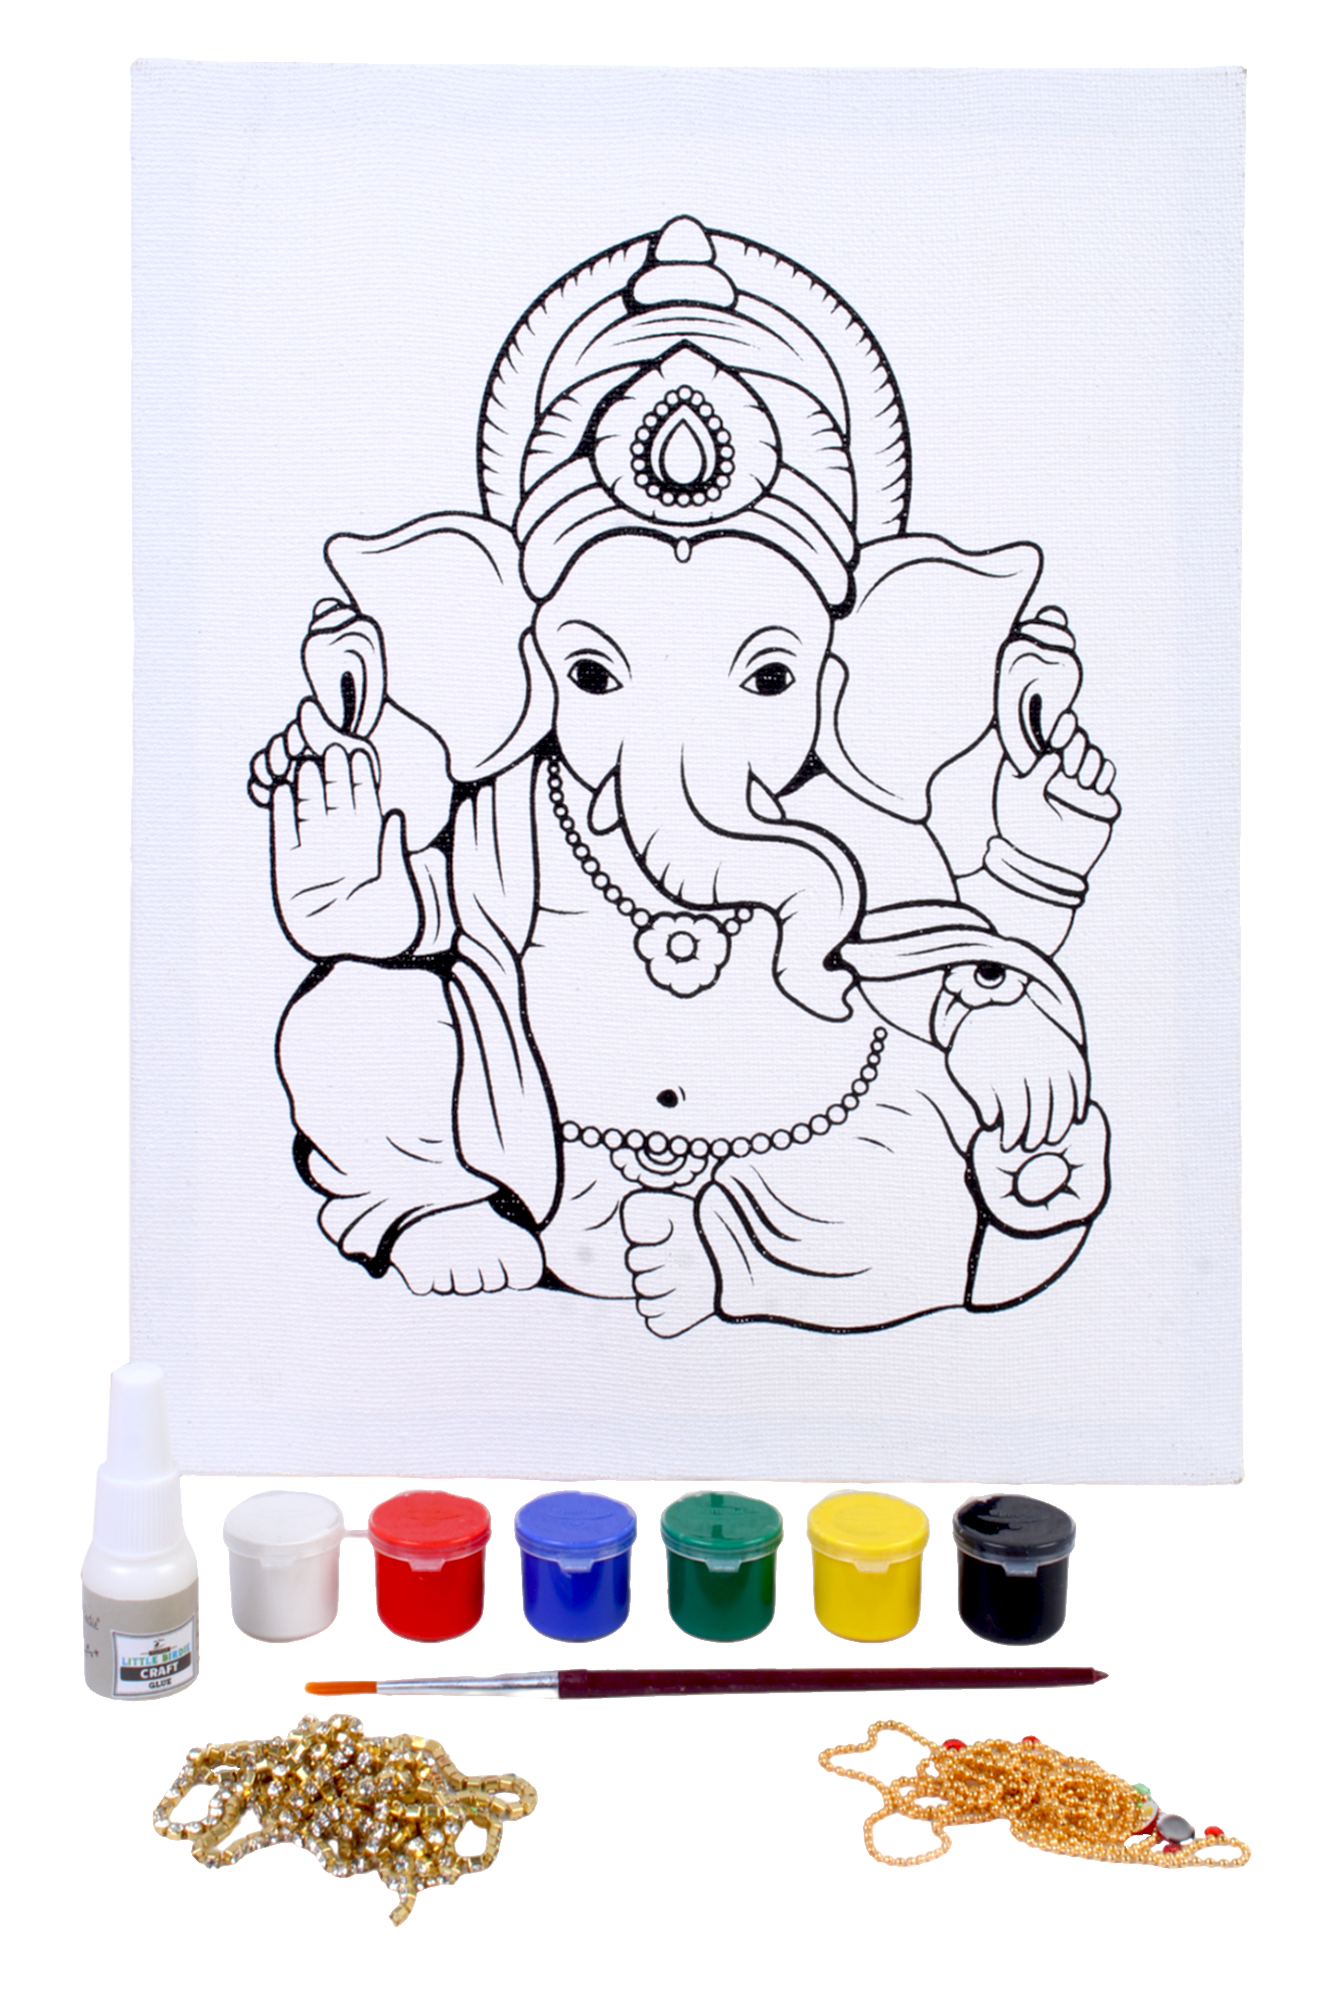 How to Draw Simple Ganesha Drawing for Kids - YouTube